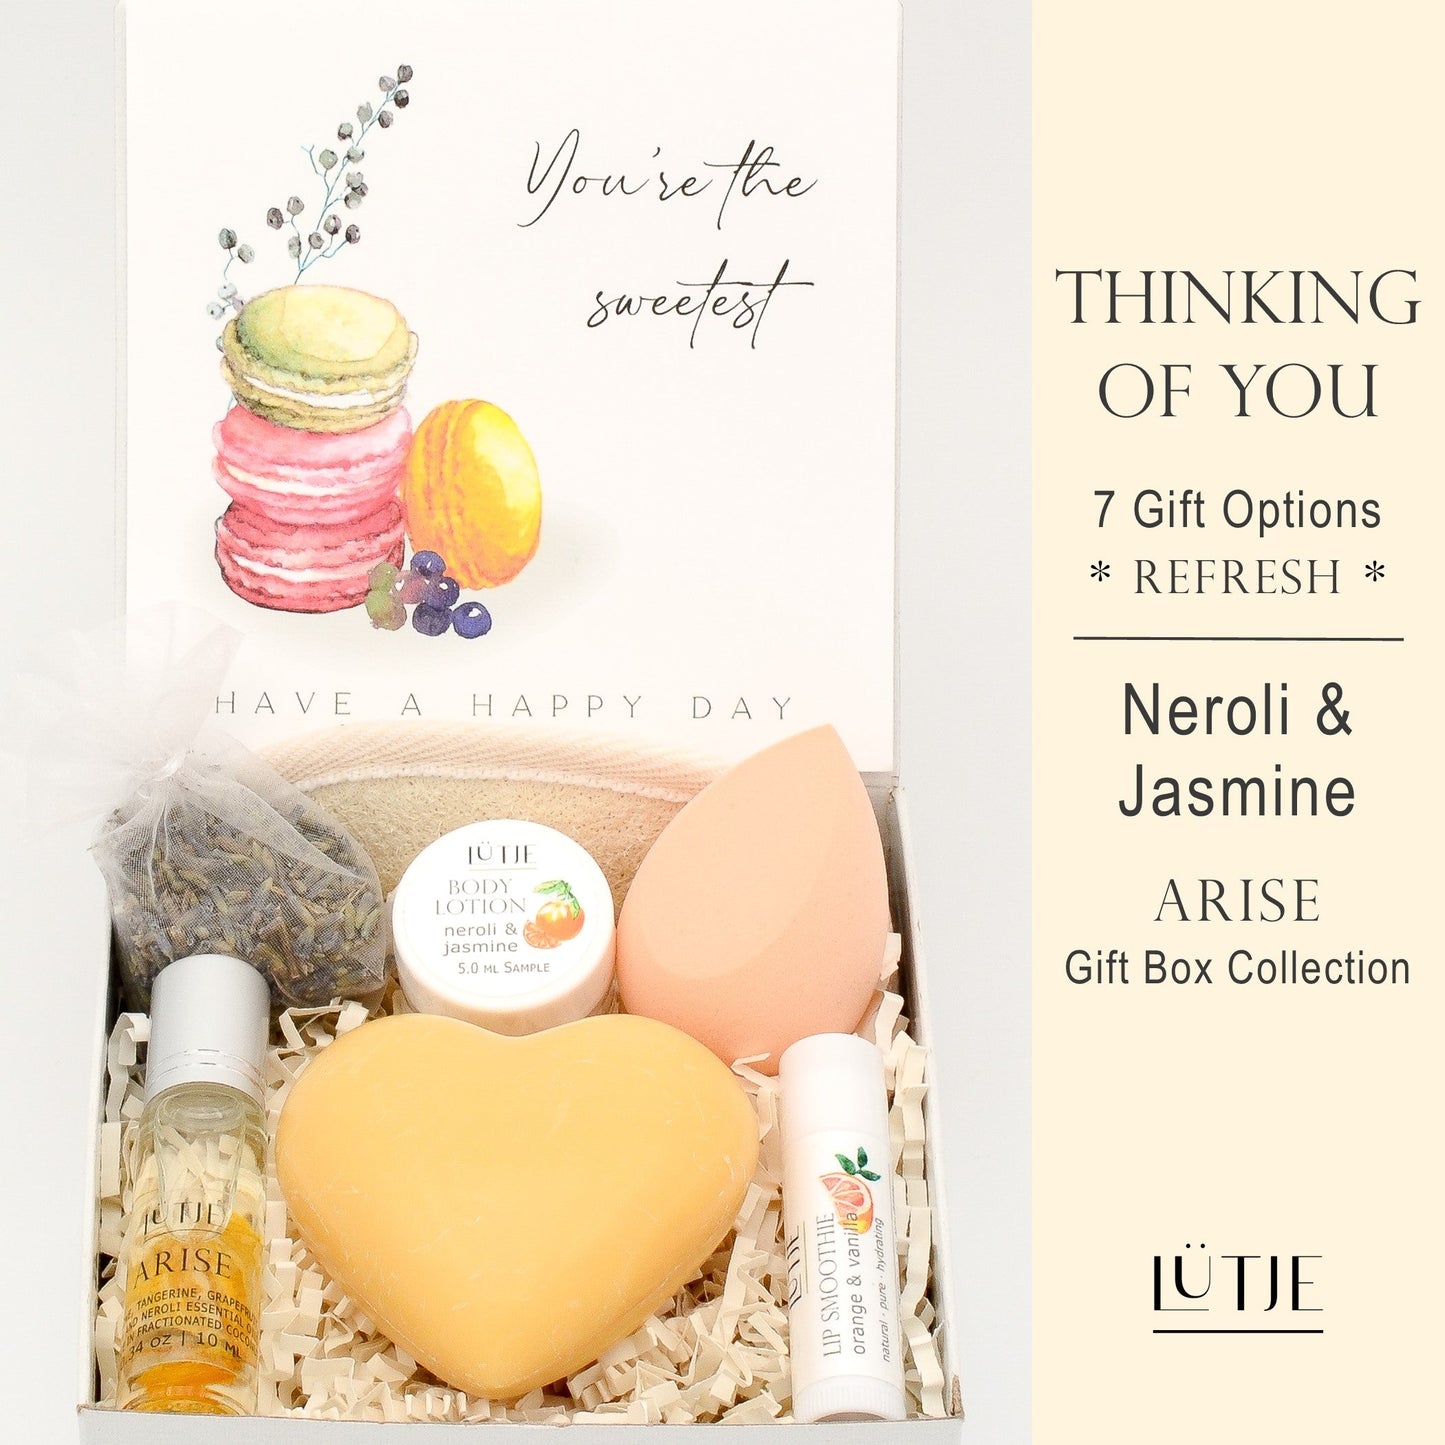 Gift Boxes for women, wife, daughter, BFF, sister, mom, or grandma, includes Neroli & Jasmine hand lotion spray and body lotion, essential oil, lip balm, soothing muscle balm, Bergamot & Pear room & linen spray, French soap, French bath salts, hydrating face mask, other bath, spa and self-care items, and 18K gold-plated necklace with engraved heart.